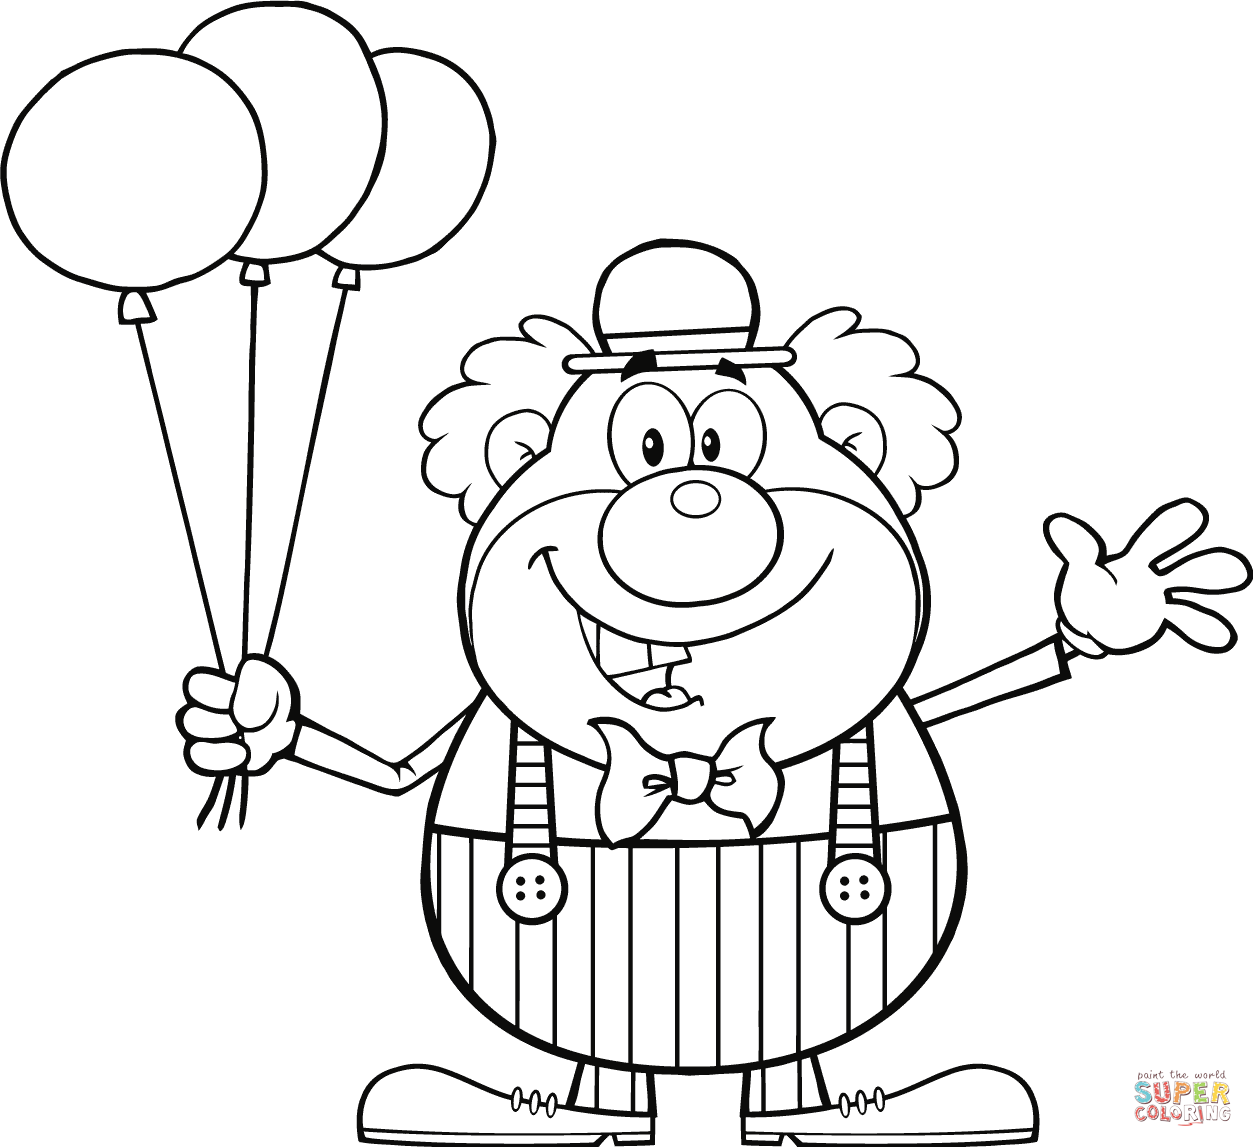 Clown with Balloons coloring page | Free Printable Coloring Pages